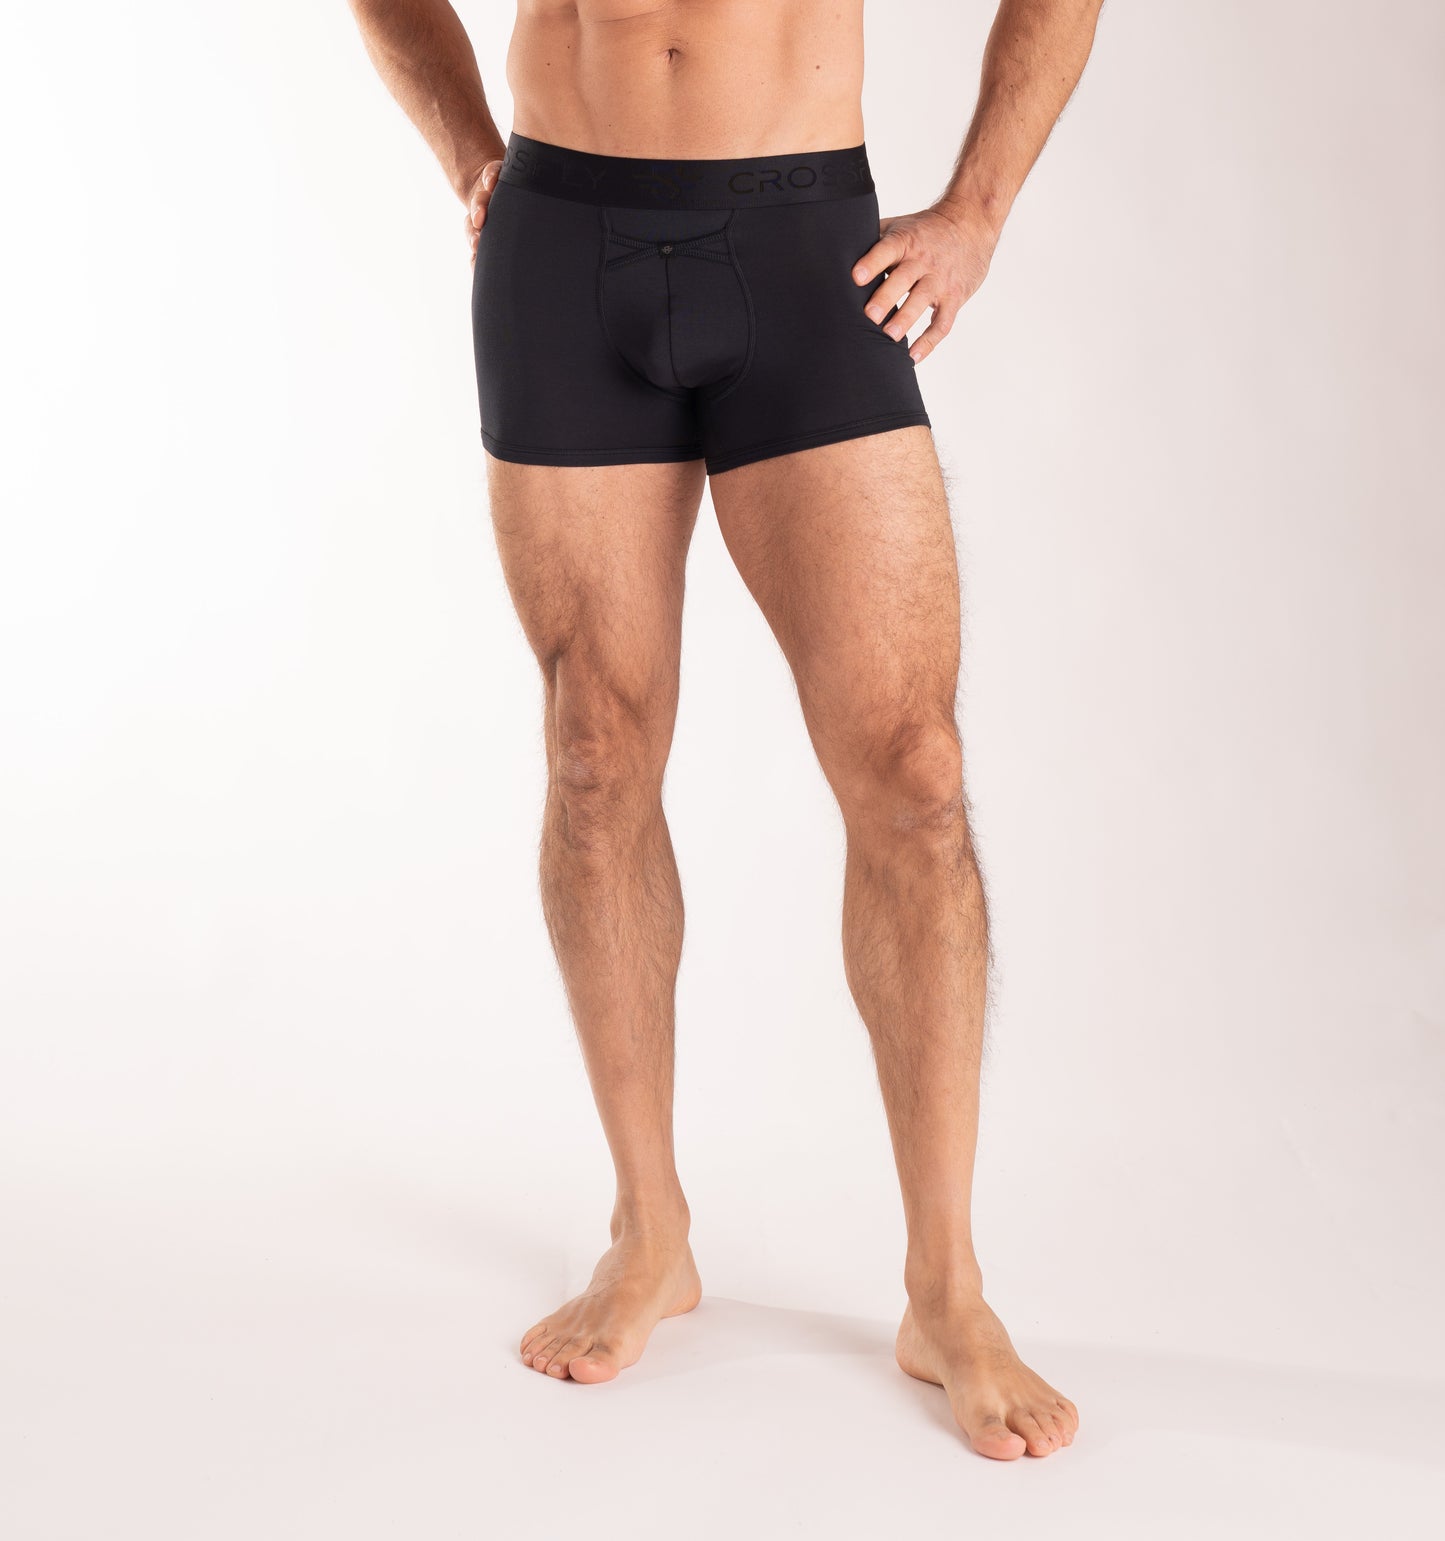 Crossfly men's IKON 3" black trunks from the Everyday series, featuring X-Fly and Coccoon internal pocket support.